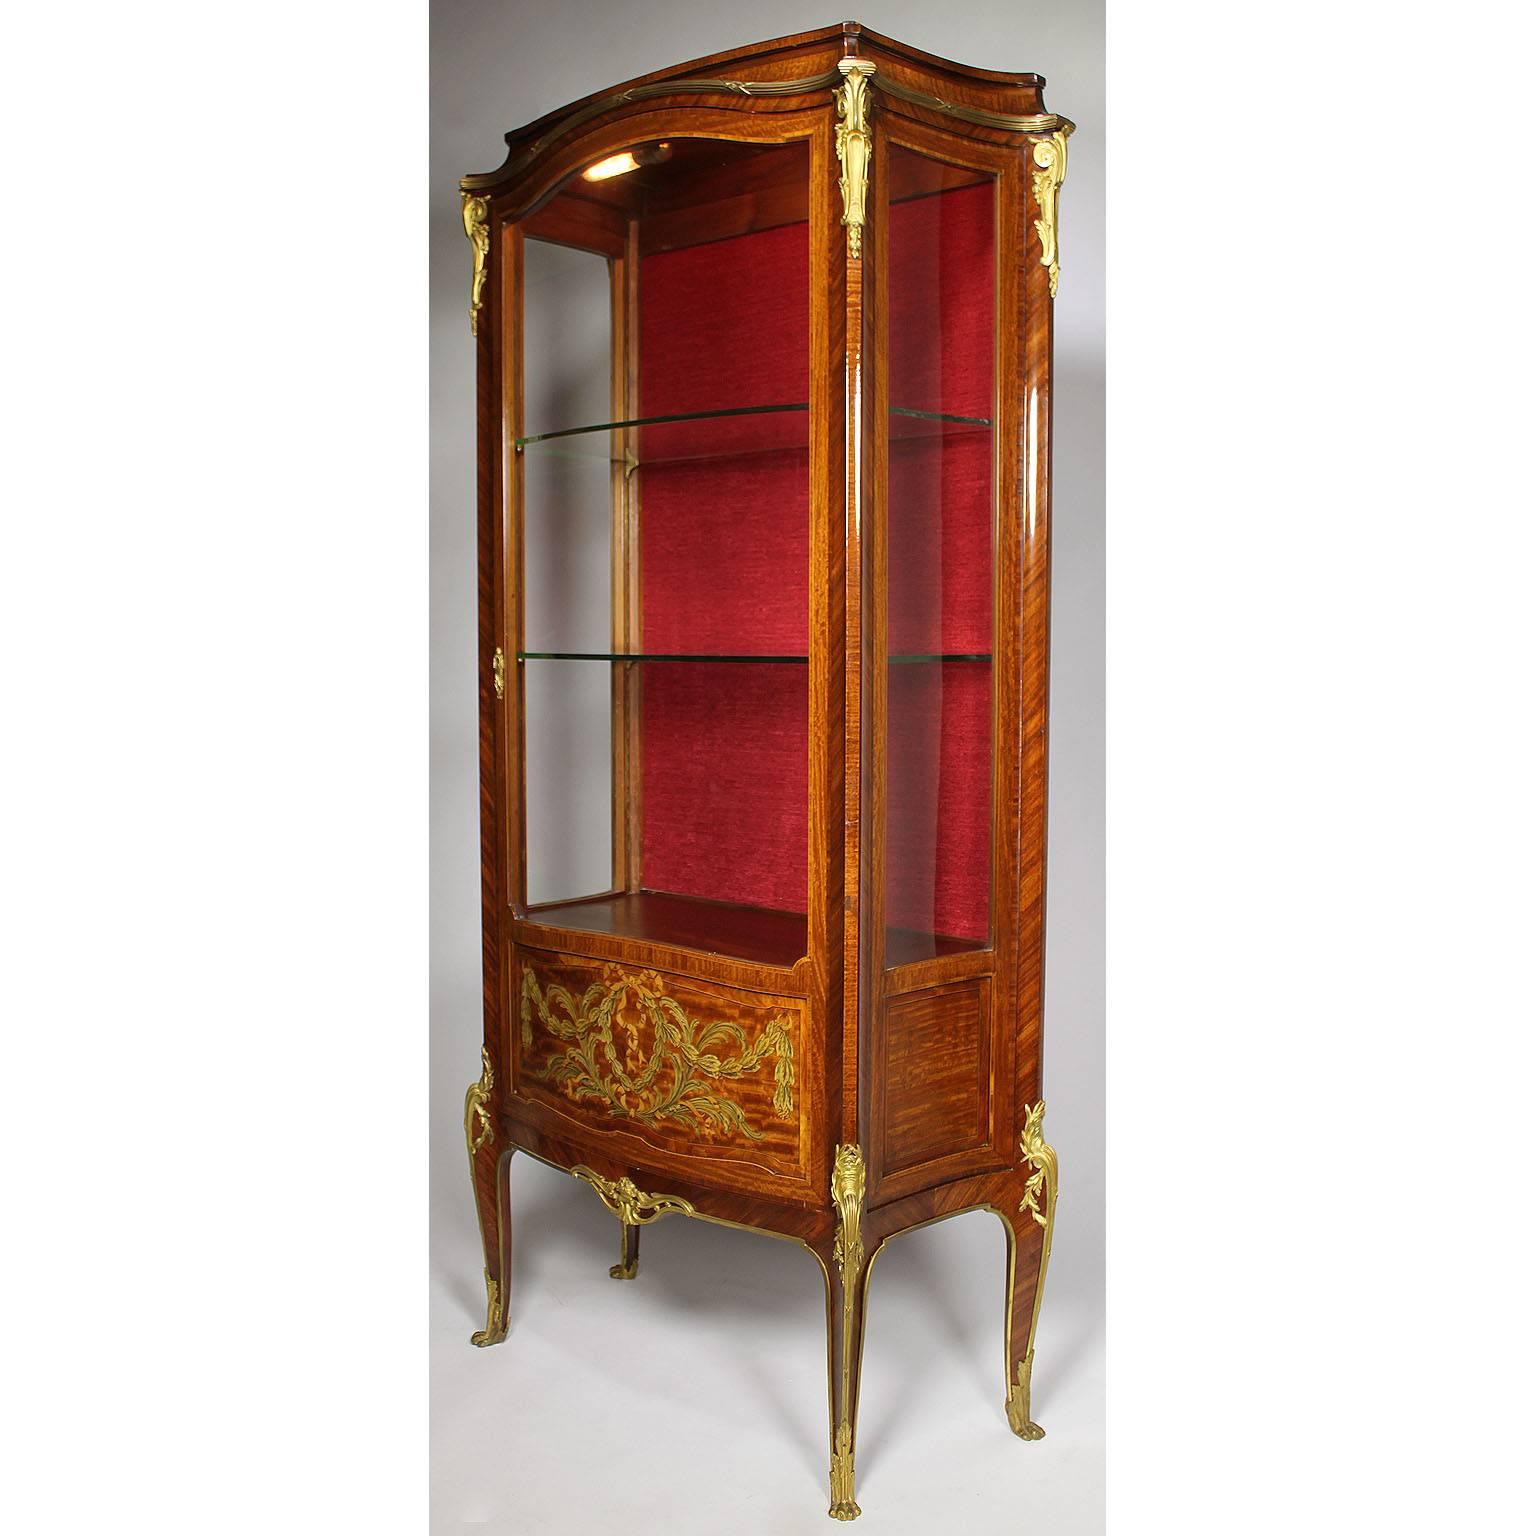 A fine French 19th-20th century kingwood and tulipwood marquetry and gilt-bronze mounted vitrine, in the manner of François Linke (1855-1946). The slender single door display cabinet with a red-velvet backing and bowed glass panels surmounted with